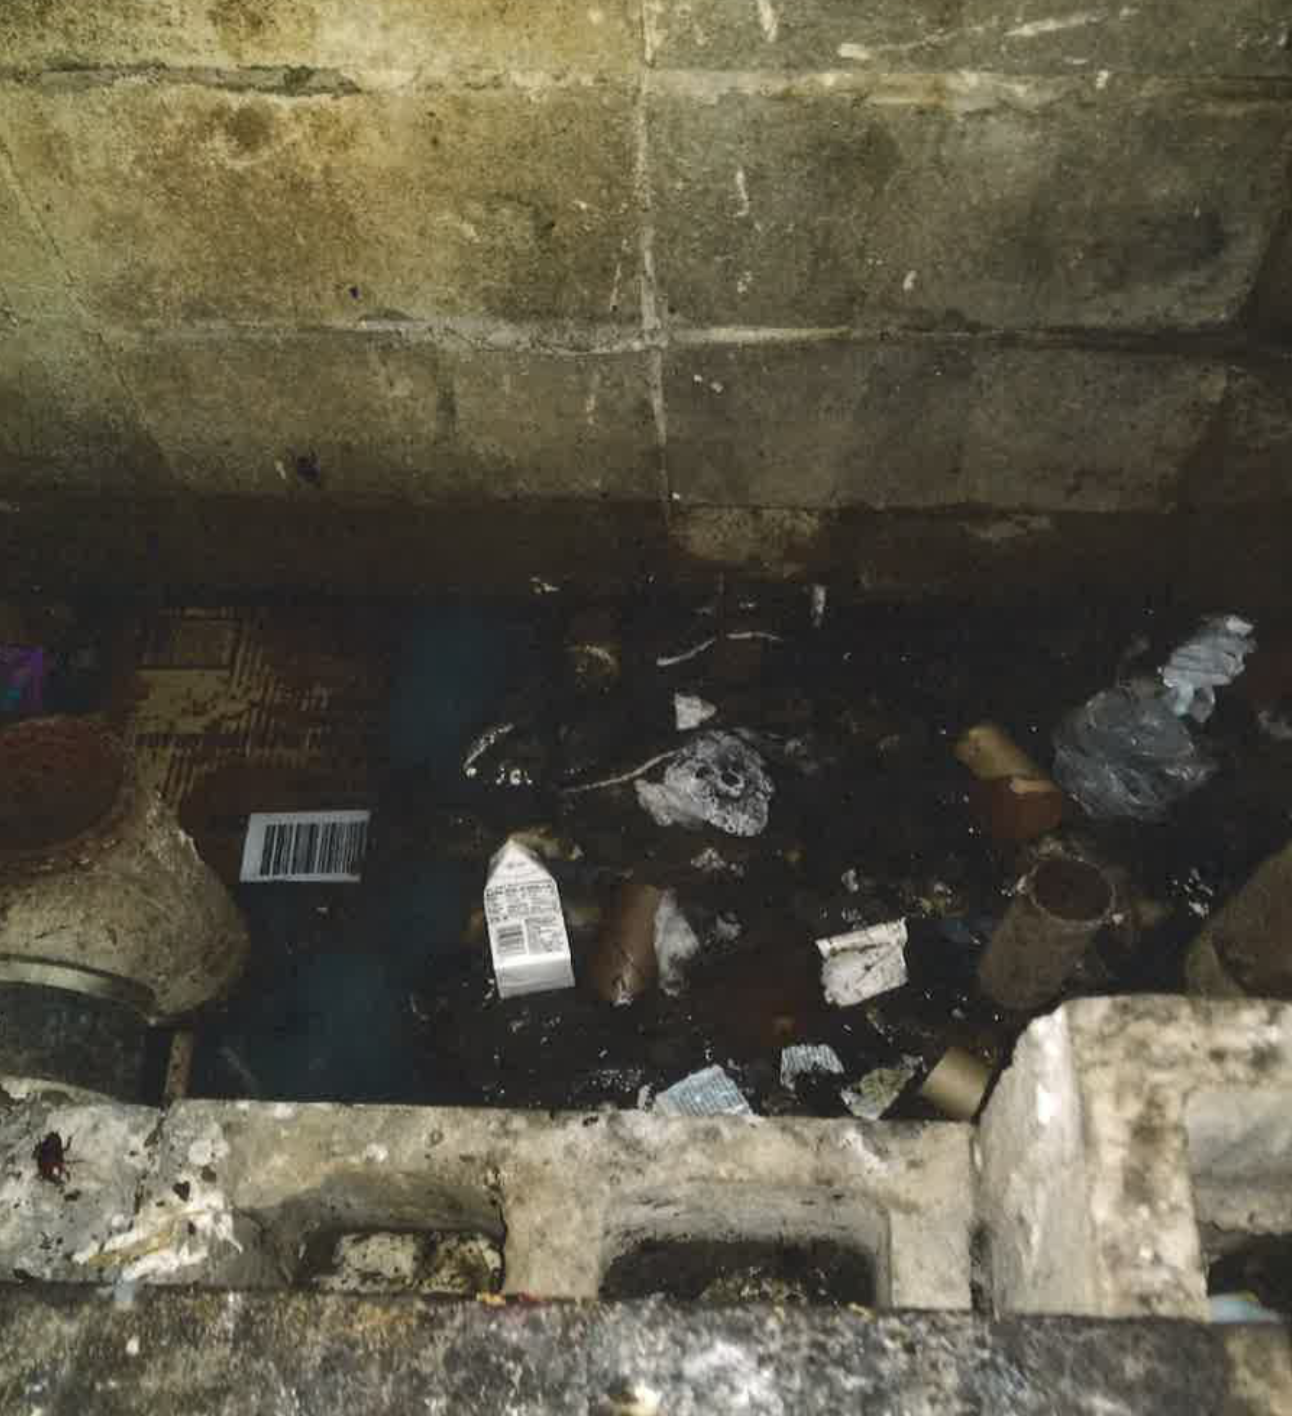 Garbage and roaches inside pipe chase, which has missing door